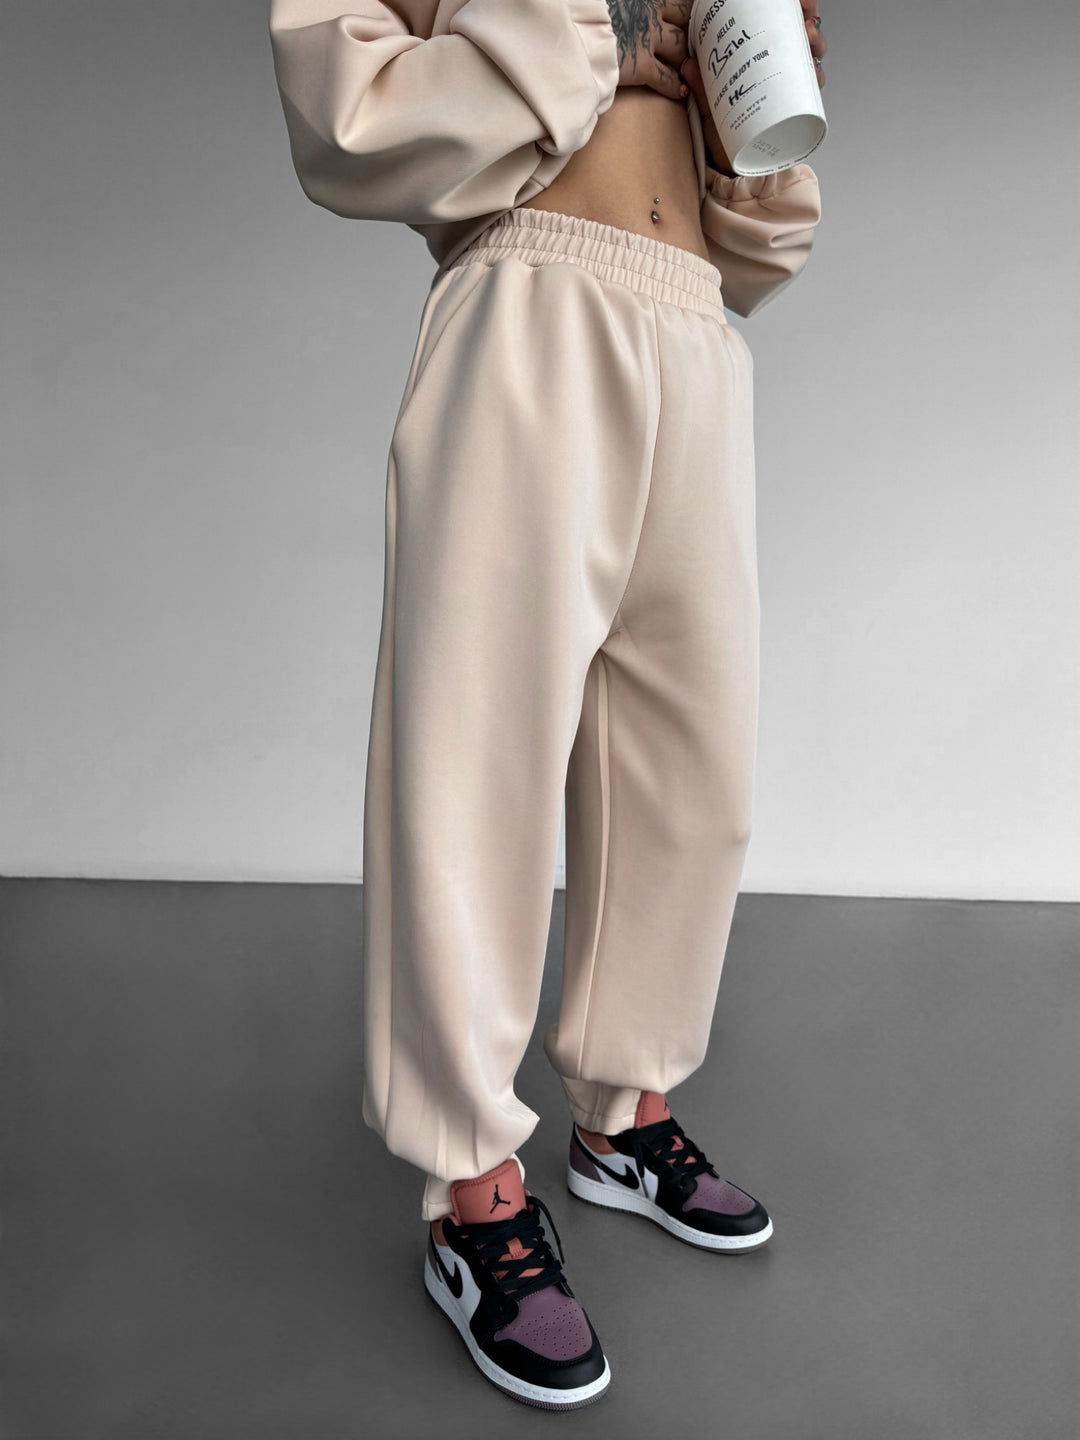 Diver Fabric Chic Trousers - Beige